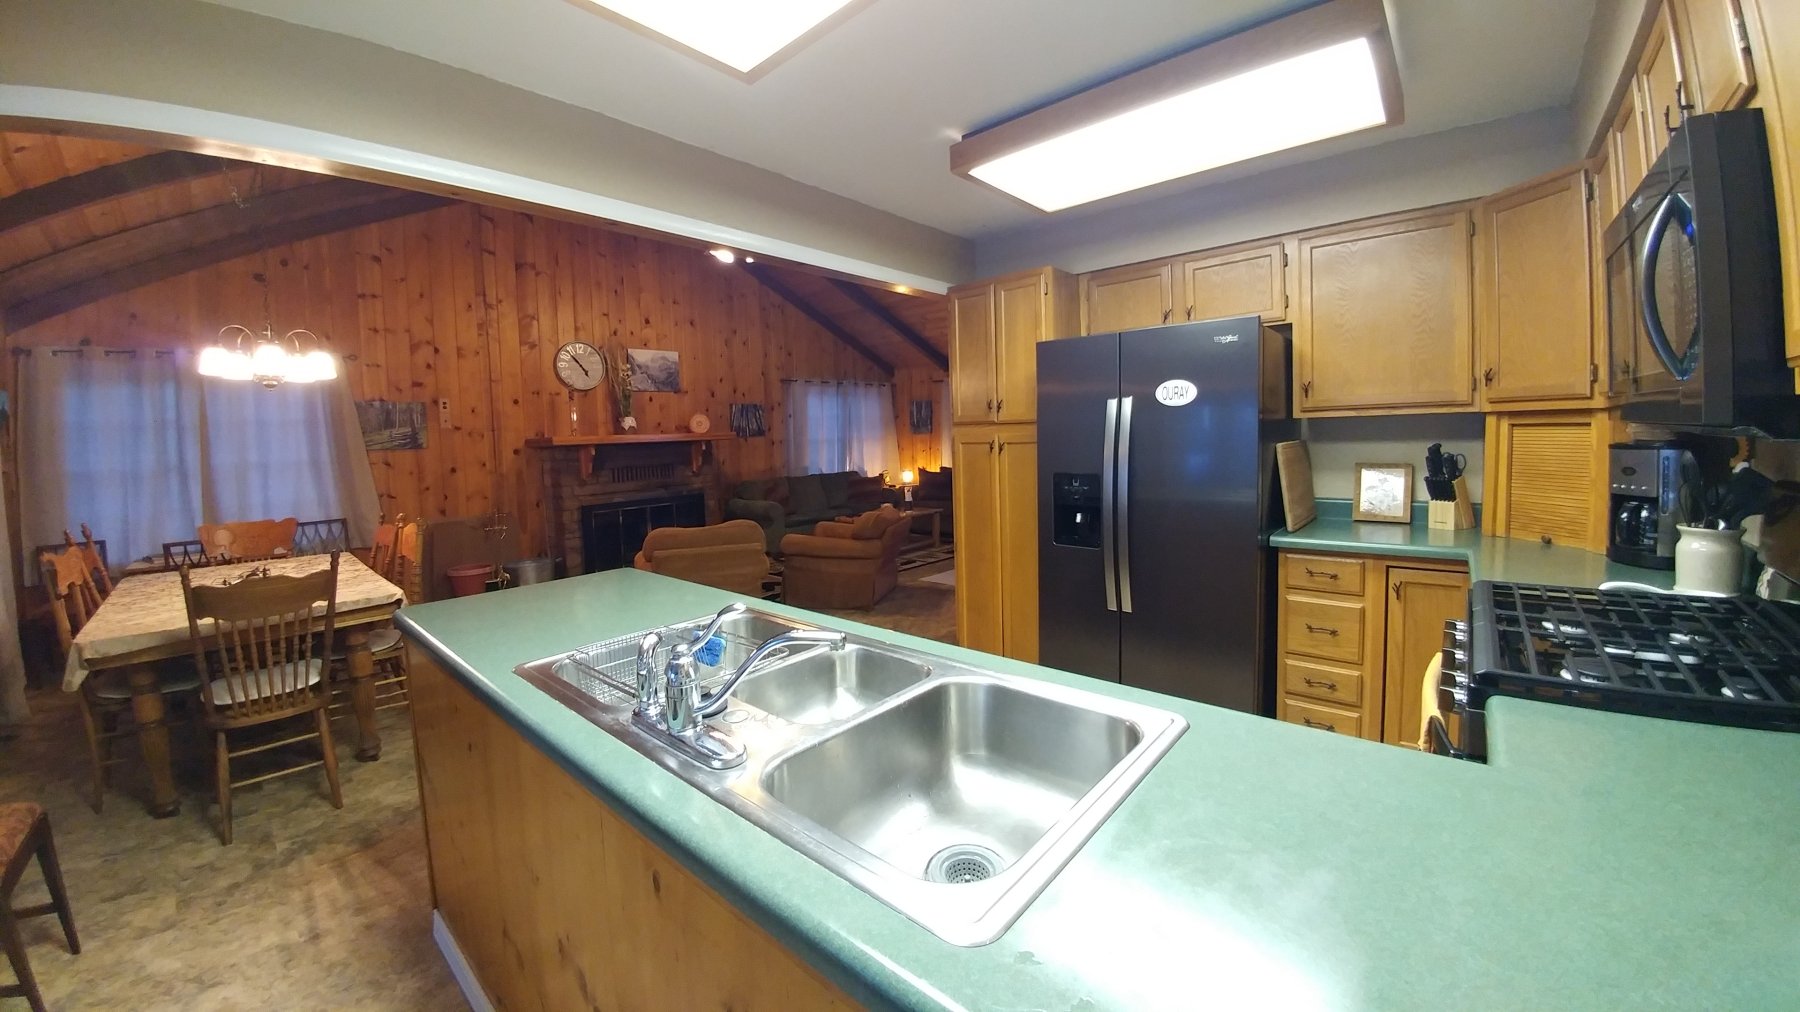 Cabin home for rent, short-term and long-term rentals